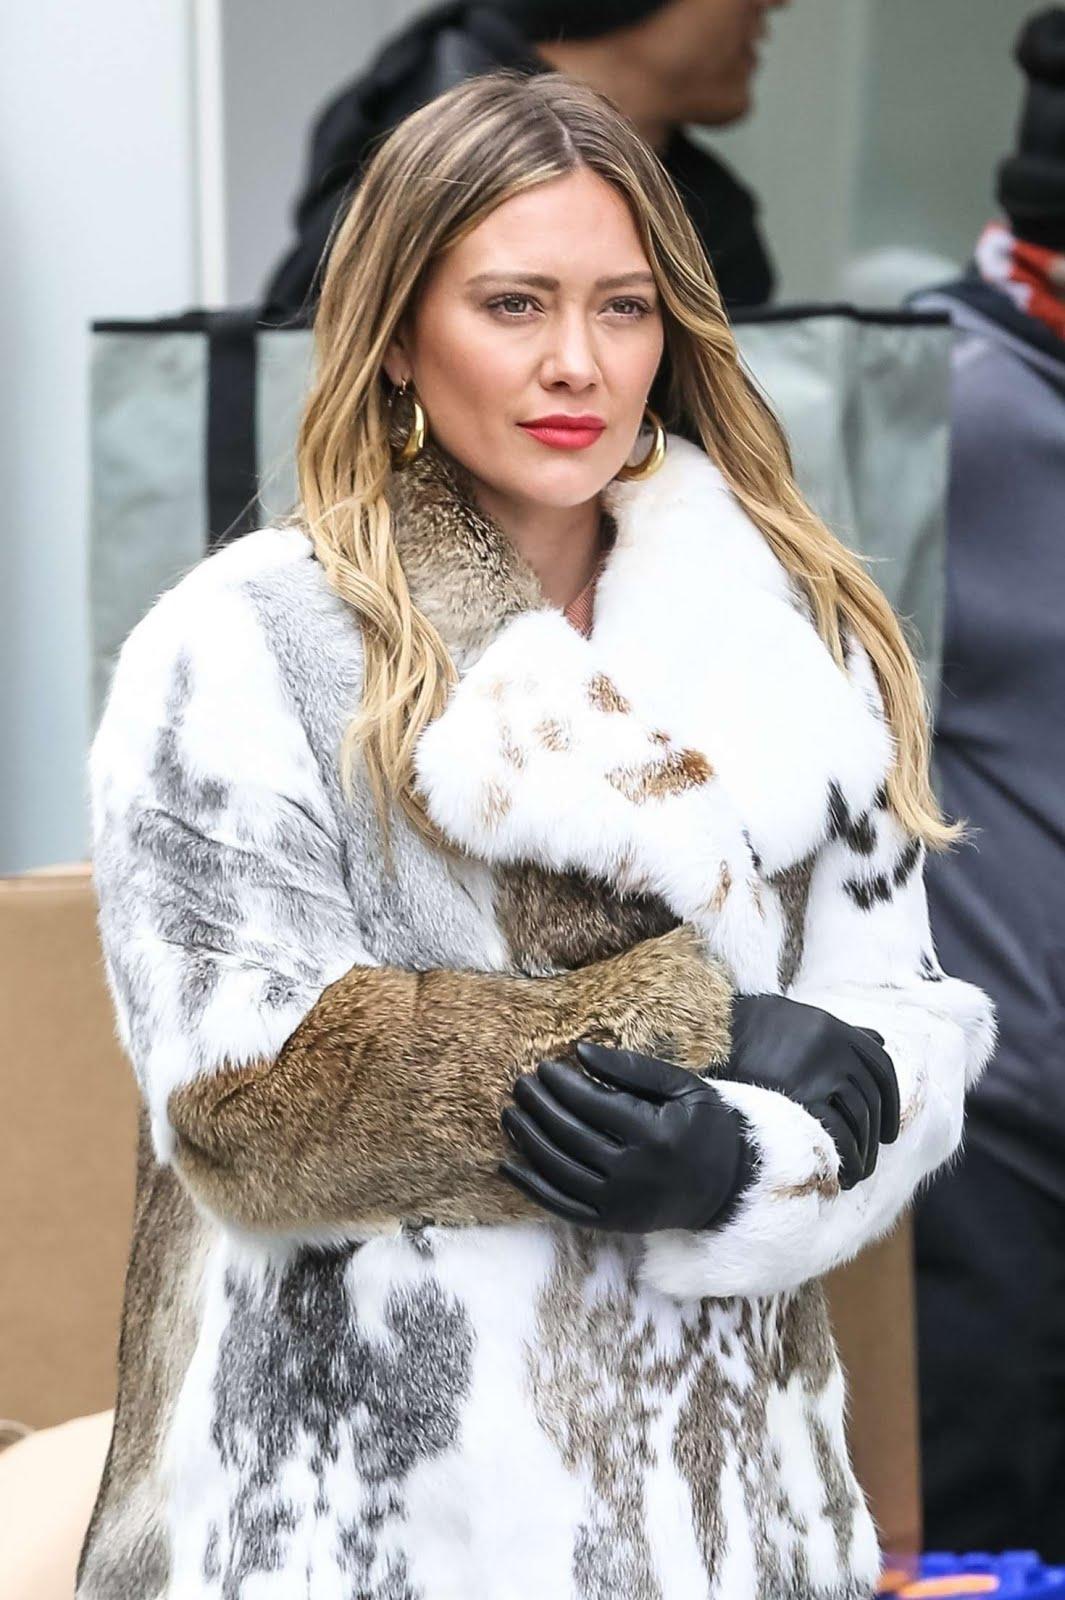 HD Photo: Hilary Duff On Set Filming Younger